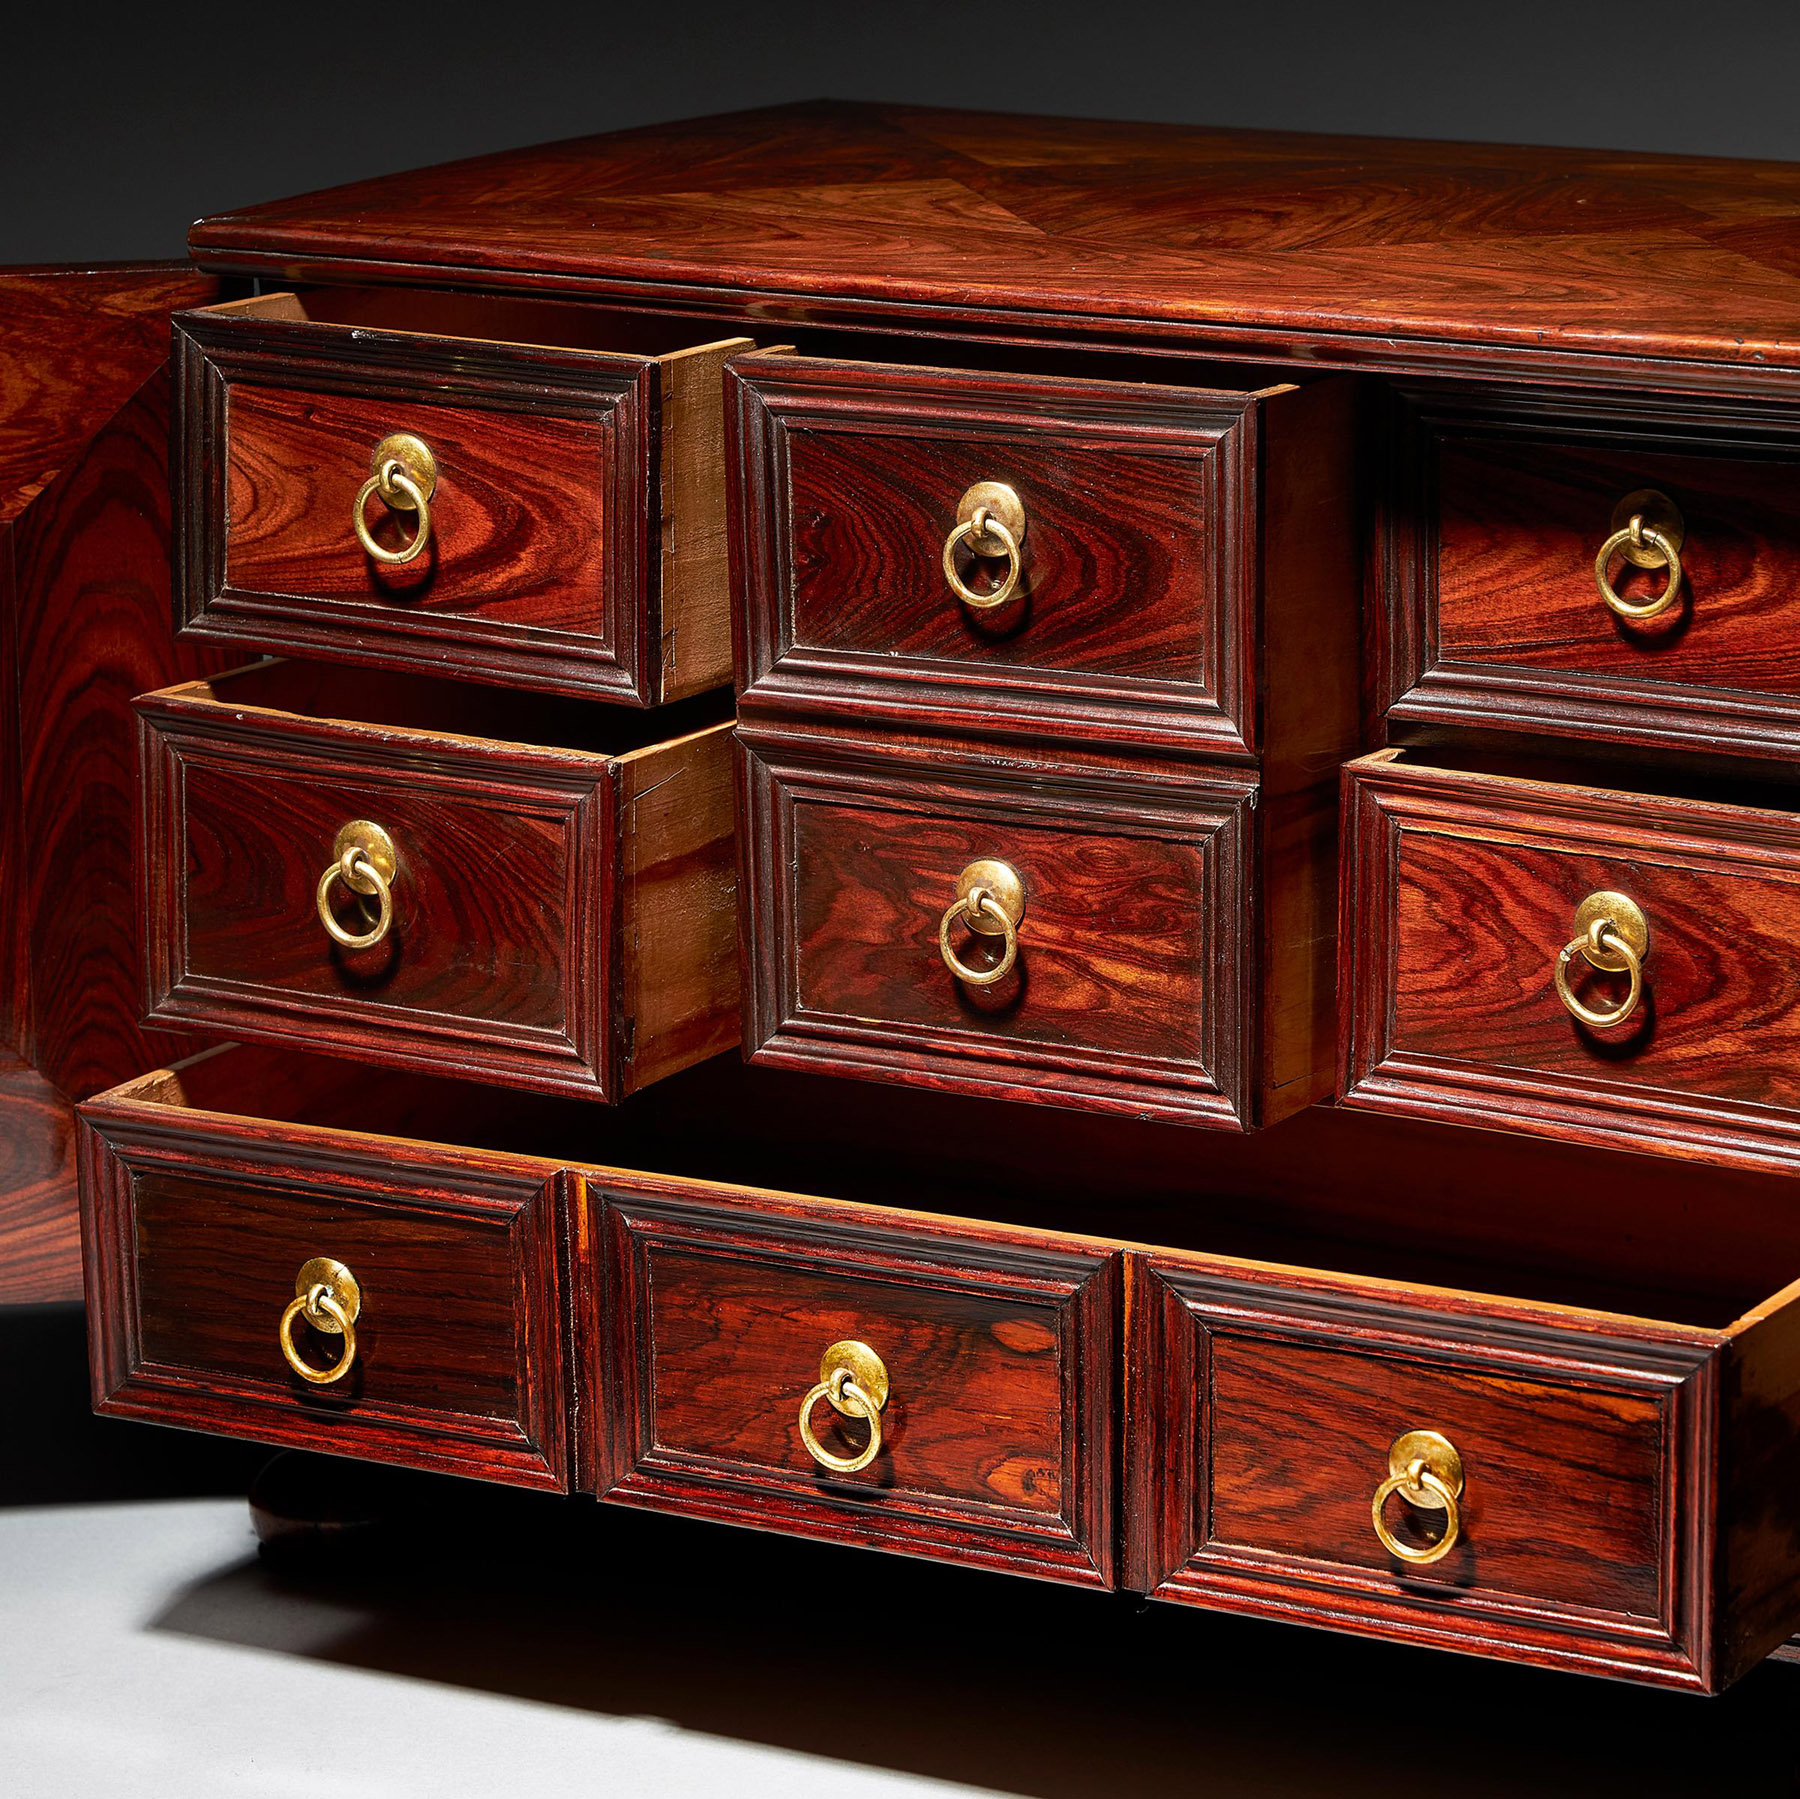 Extremely Rare and Fine Miniature Kingwood Table Cabinet from the Reign of Charles II 18